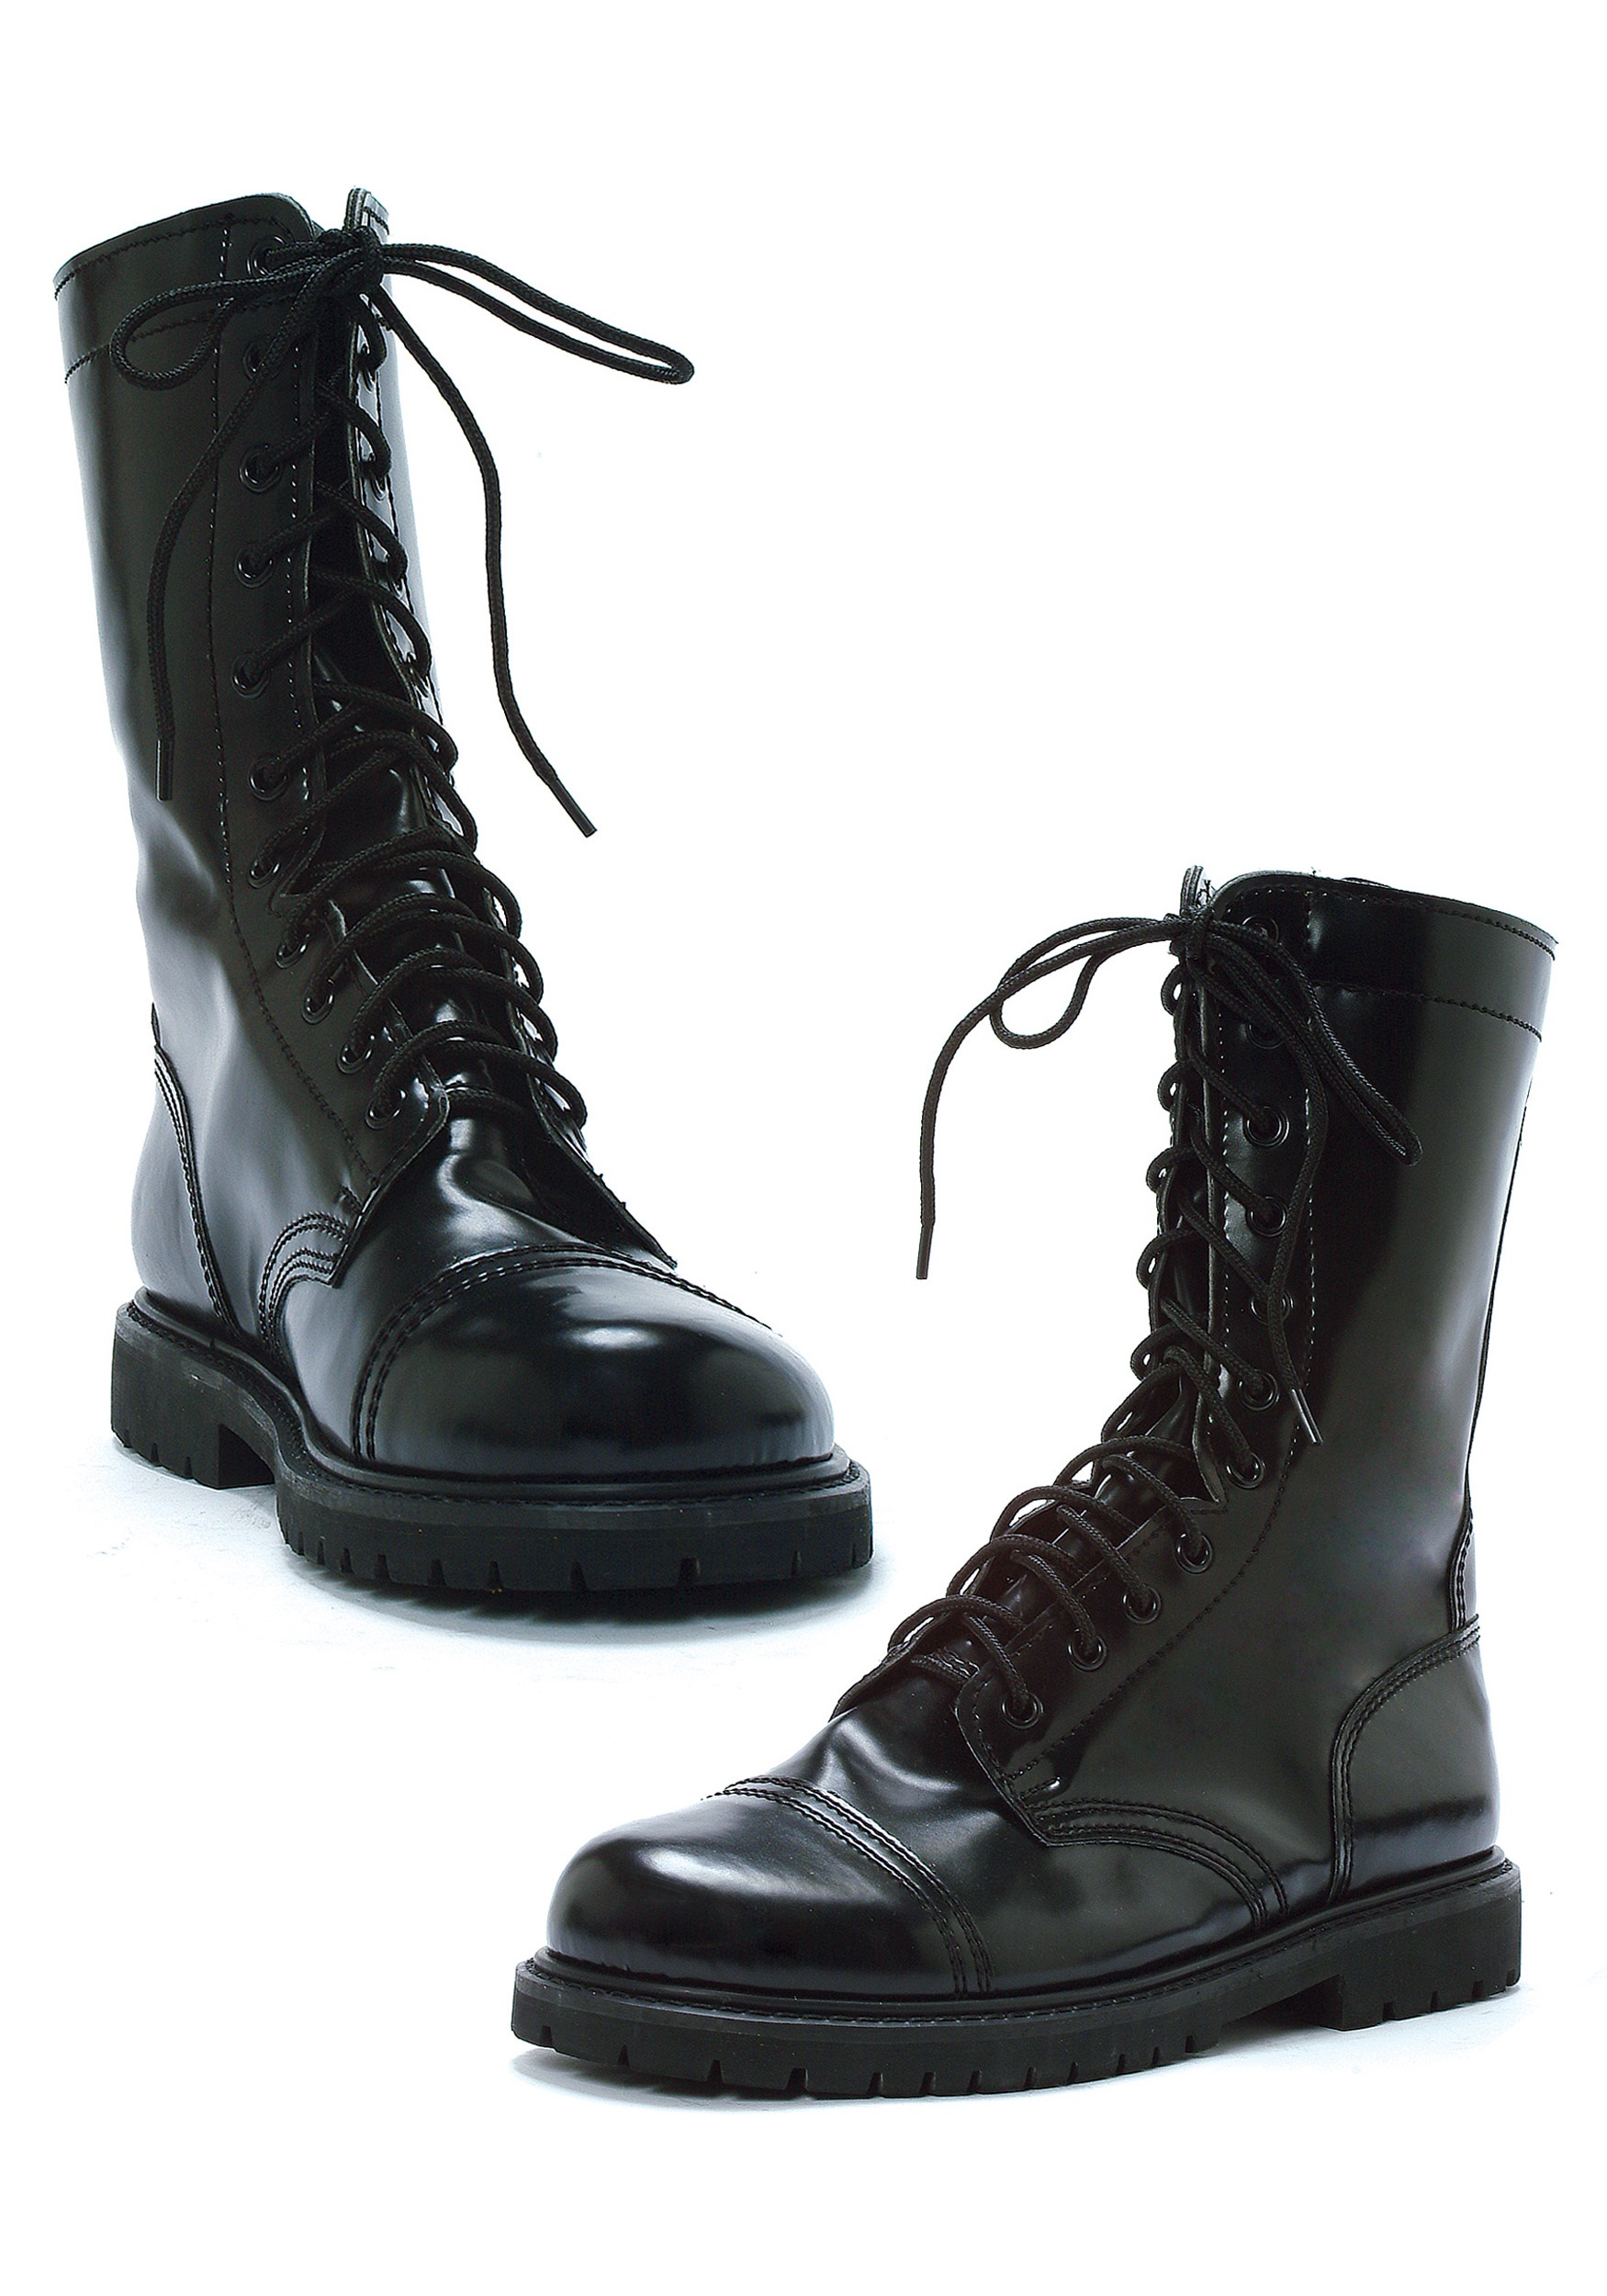 black military boots